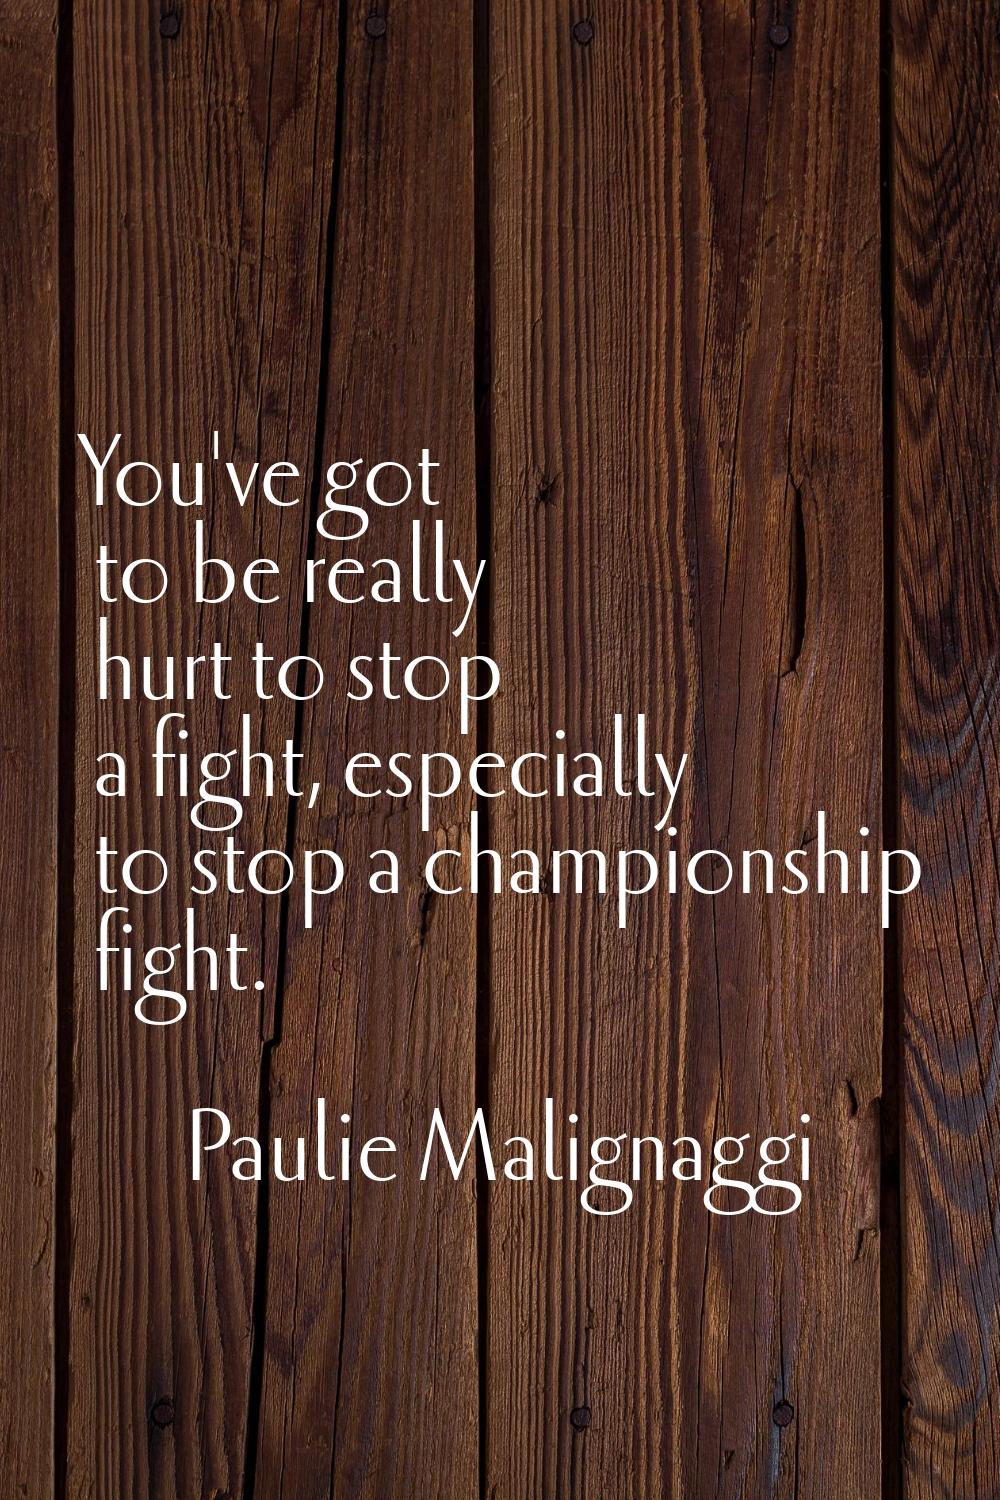 You've got to be really hurt to stop a fight, especially to stop a championship fight.